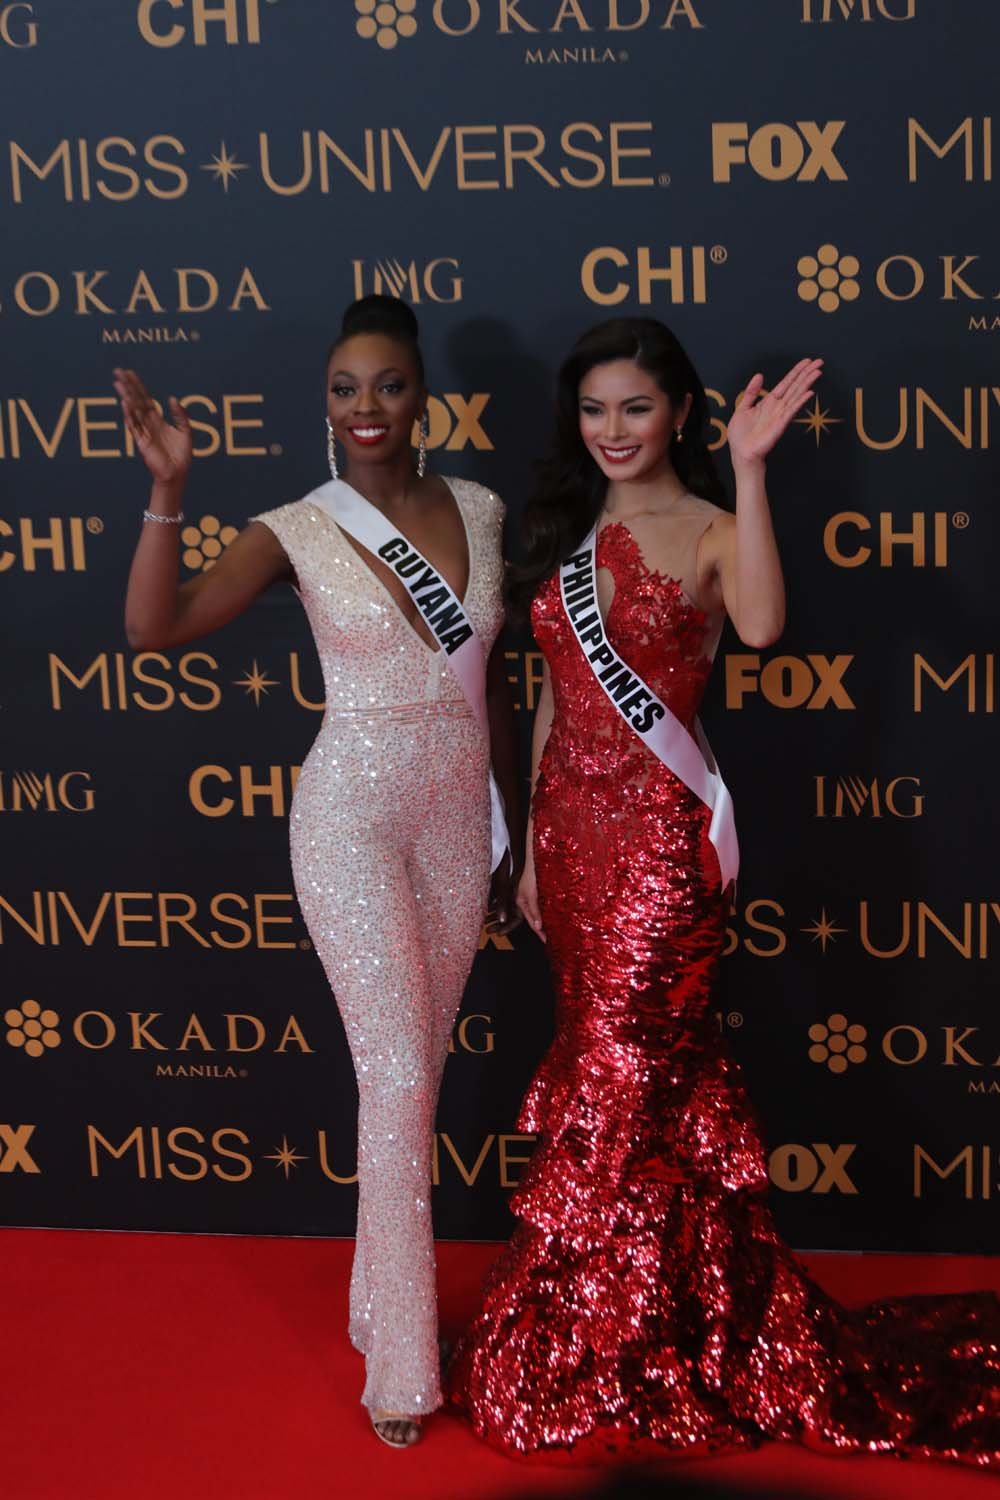 Miss PHL with Miss Guyana at the Miss Universe 2016 red carpet